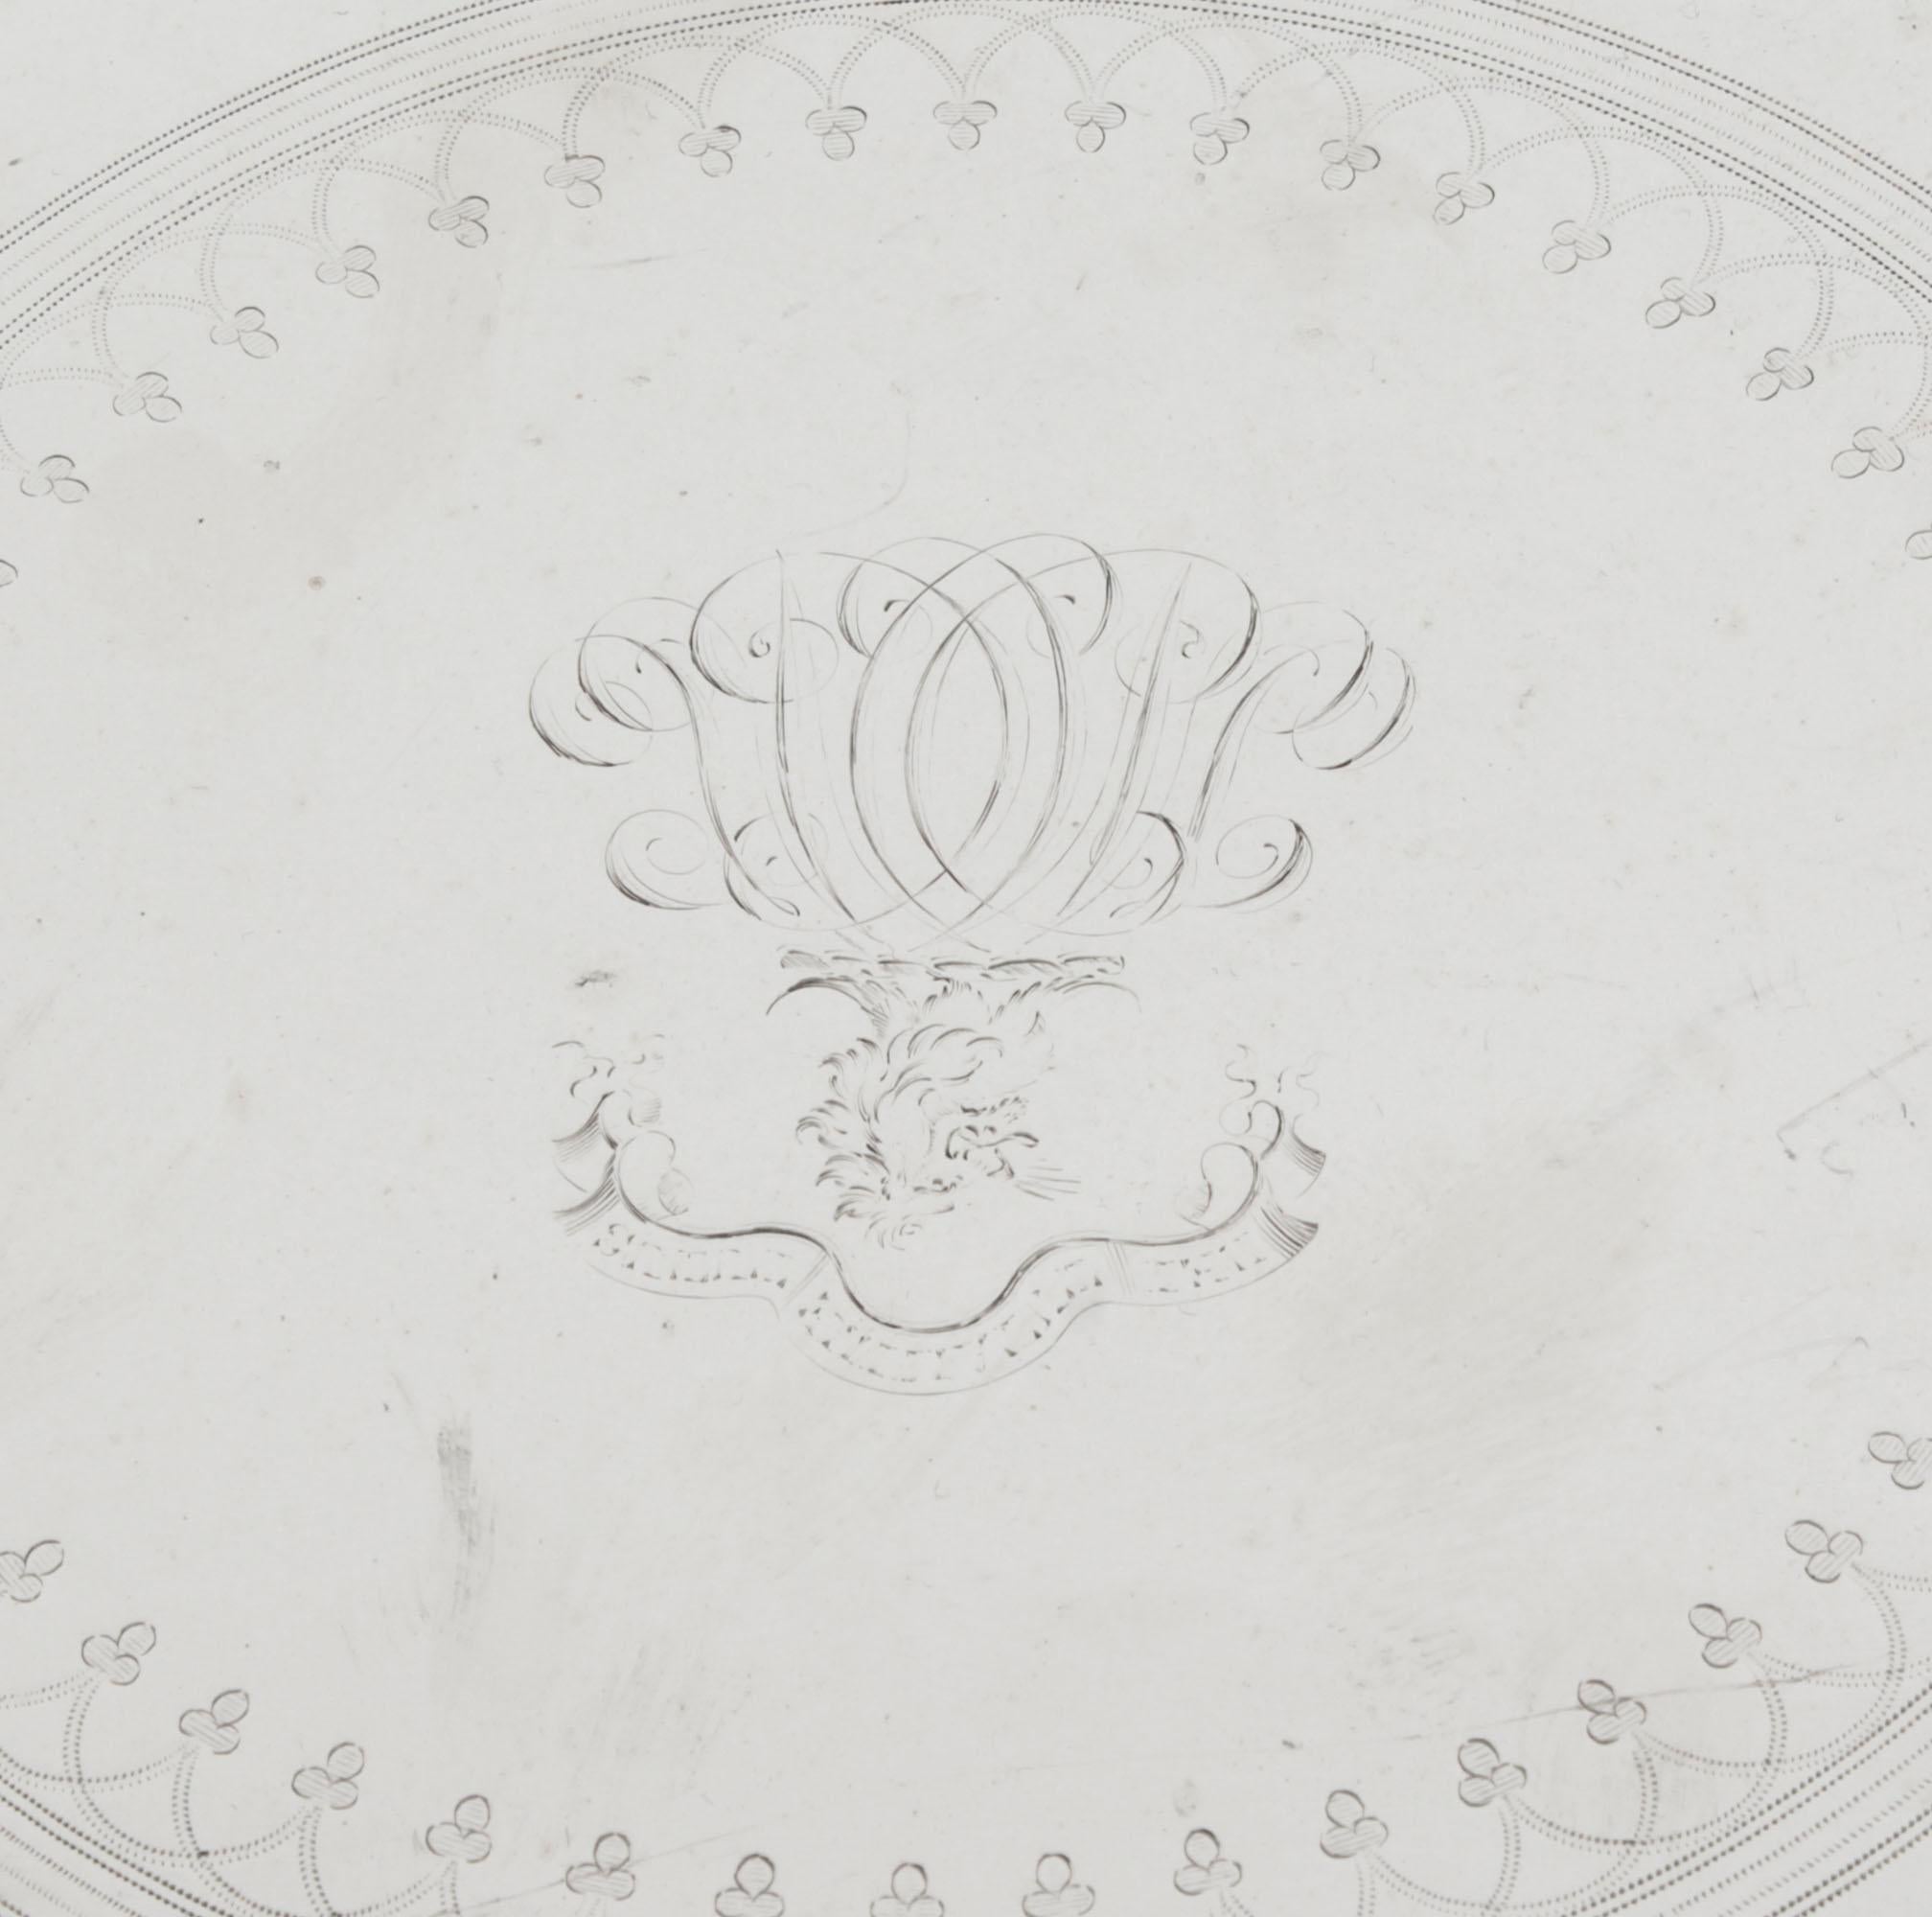 Late 19th Century Antique Large English Victorian Silver Plated Salver 19th Century For Sale